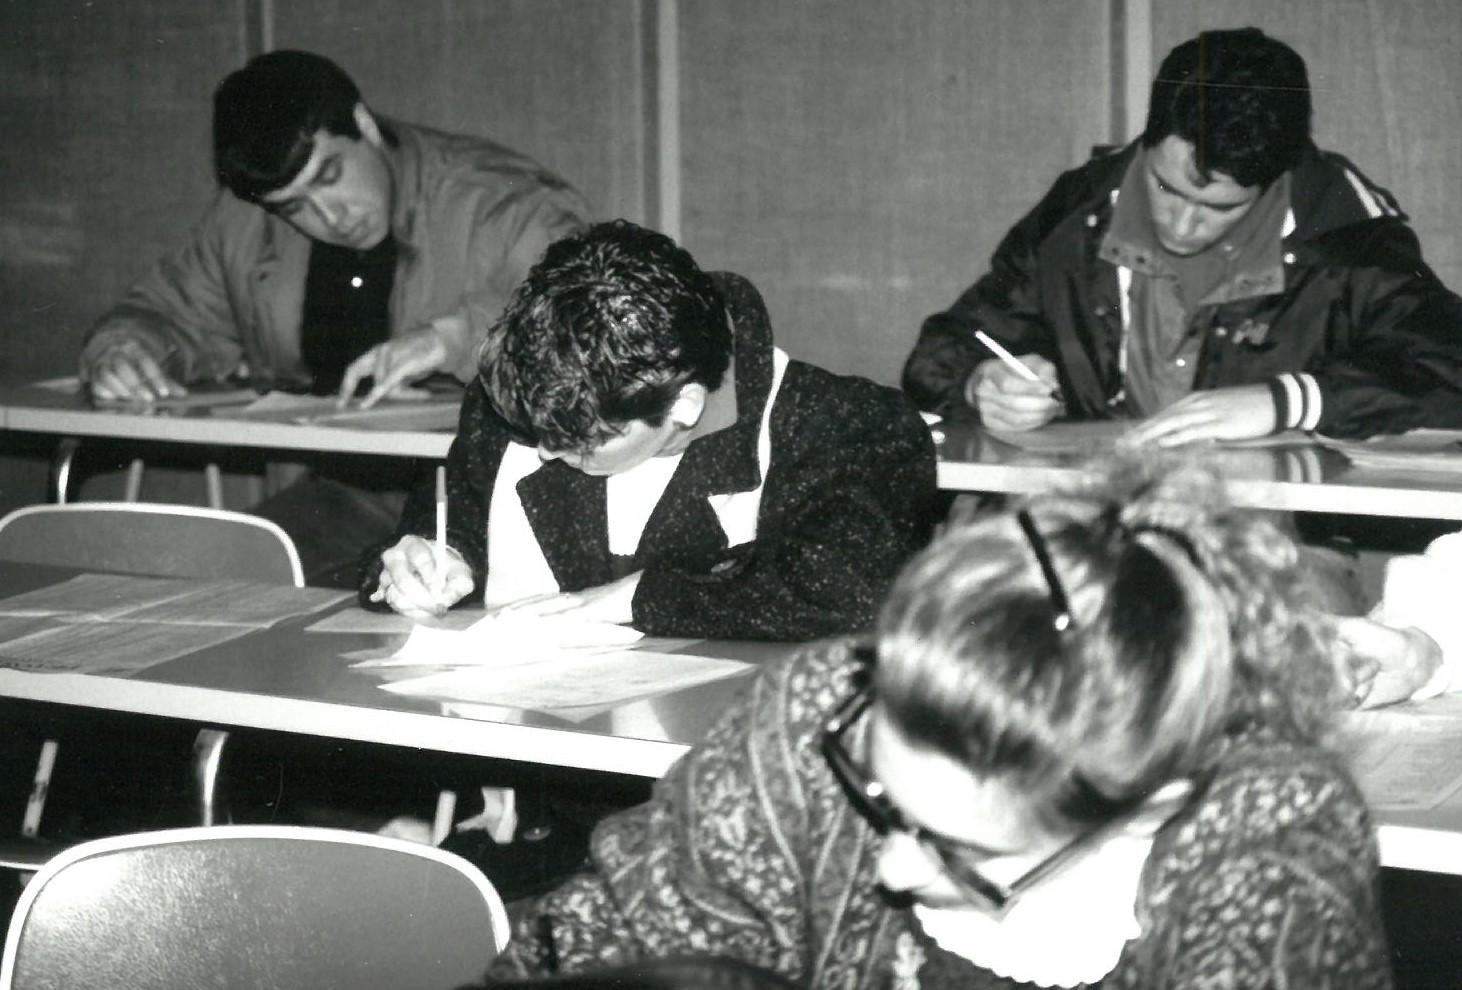 Students in classroom, circa 1970s